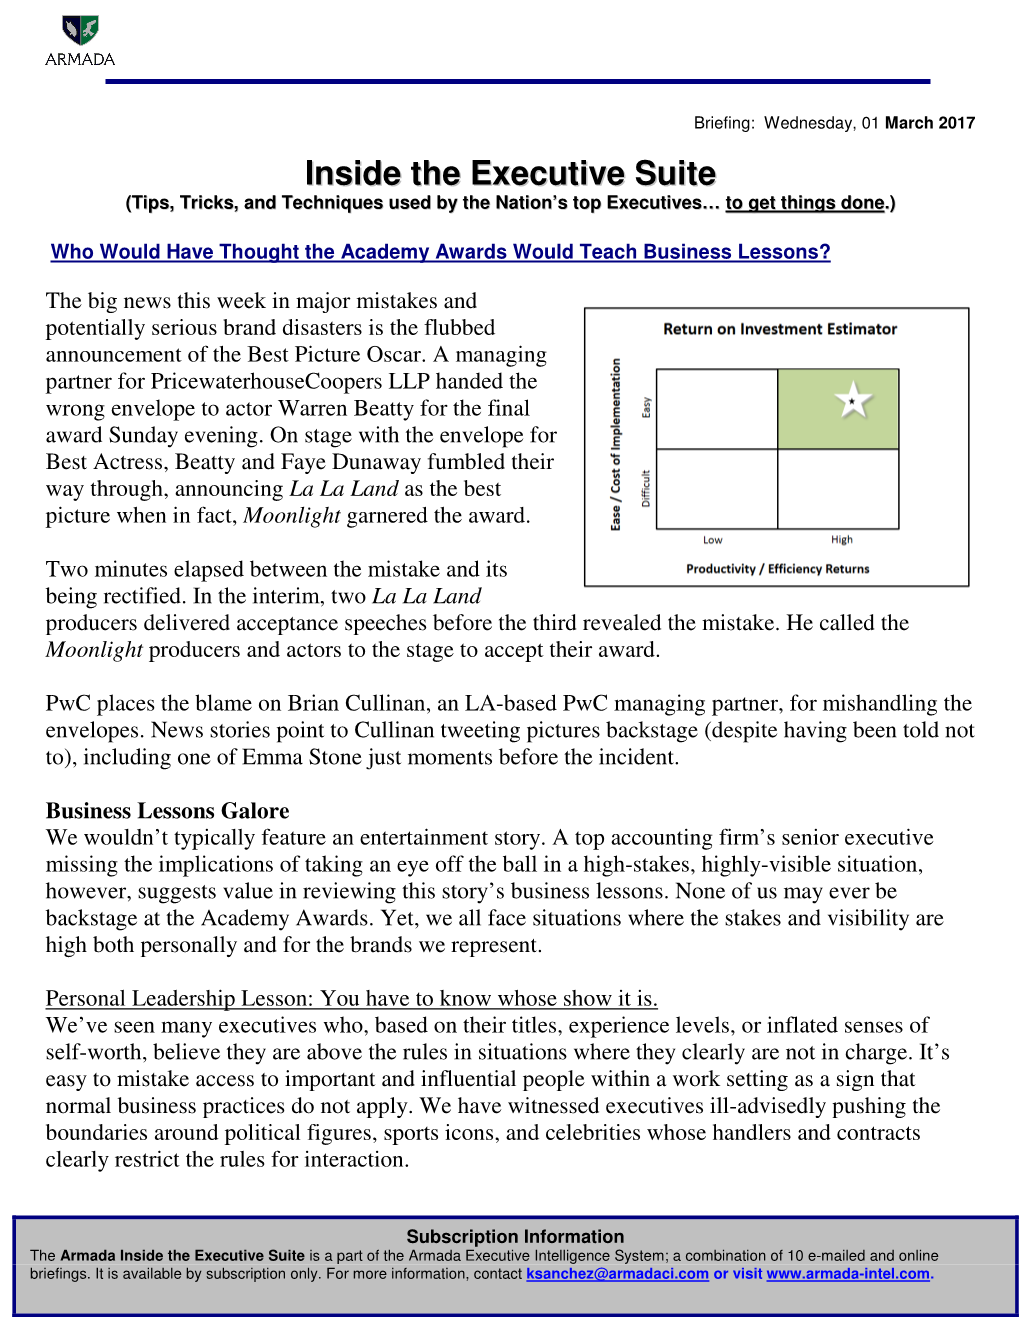 Inside the Executive Suite (Tips, Tricks, and Techniques Used by the Nation’S Top Executives… to Get Things Done.)